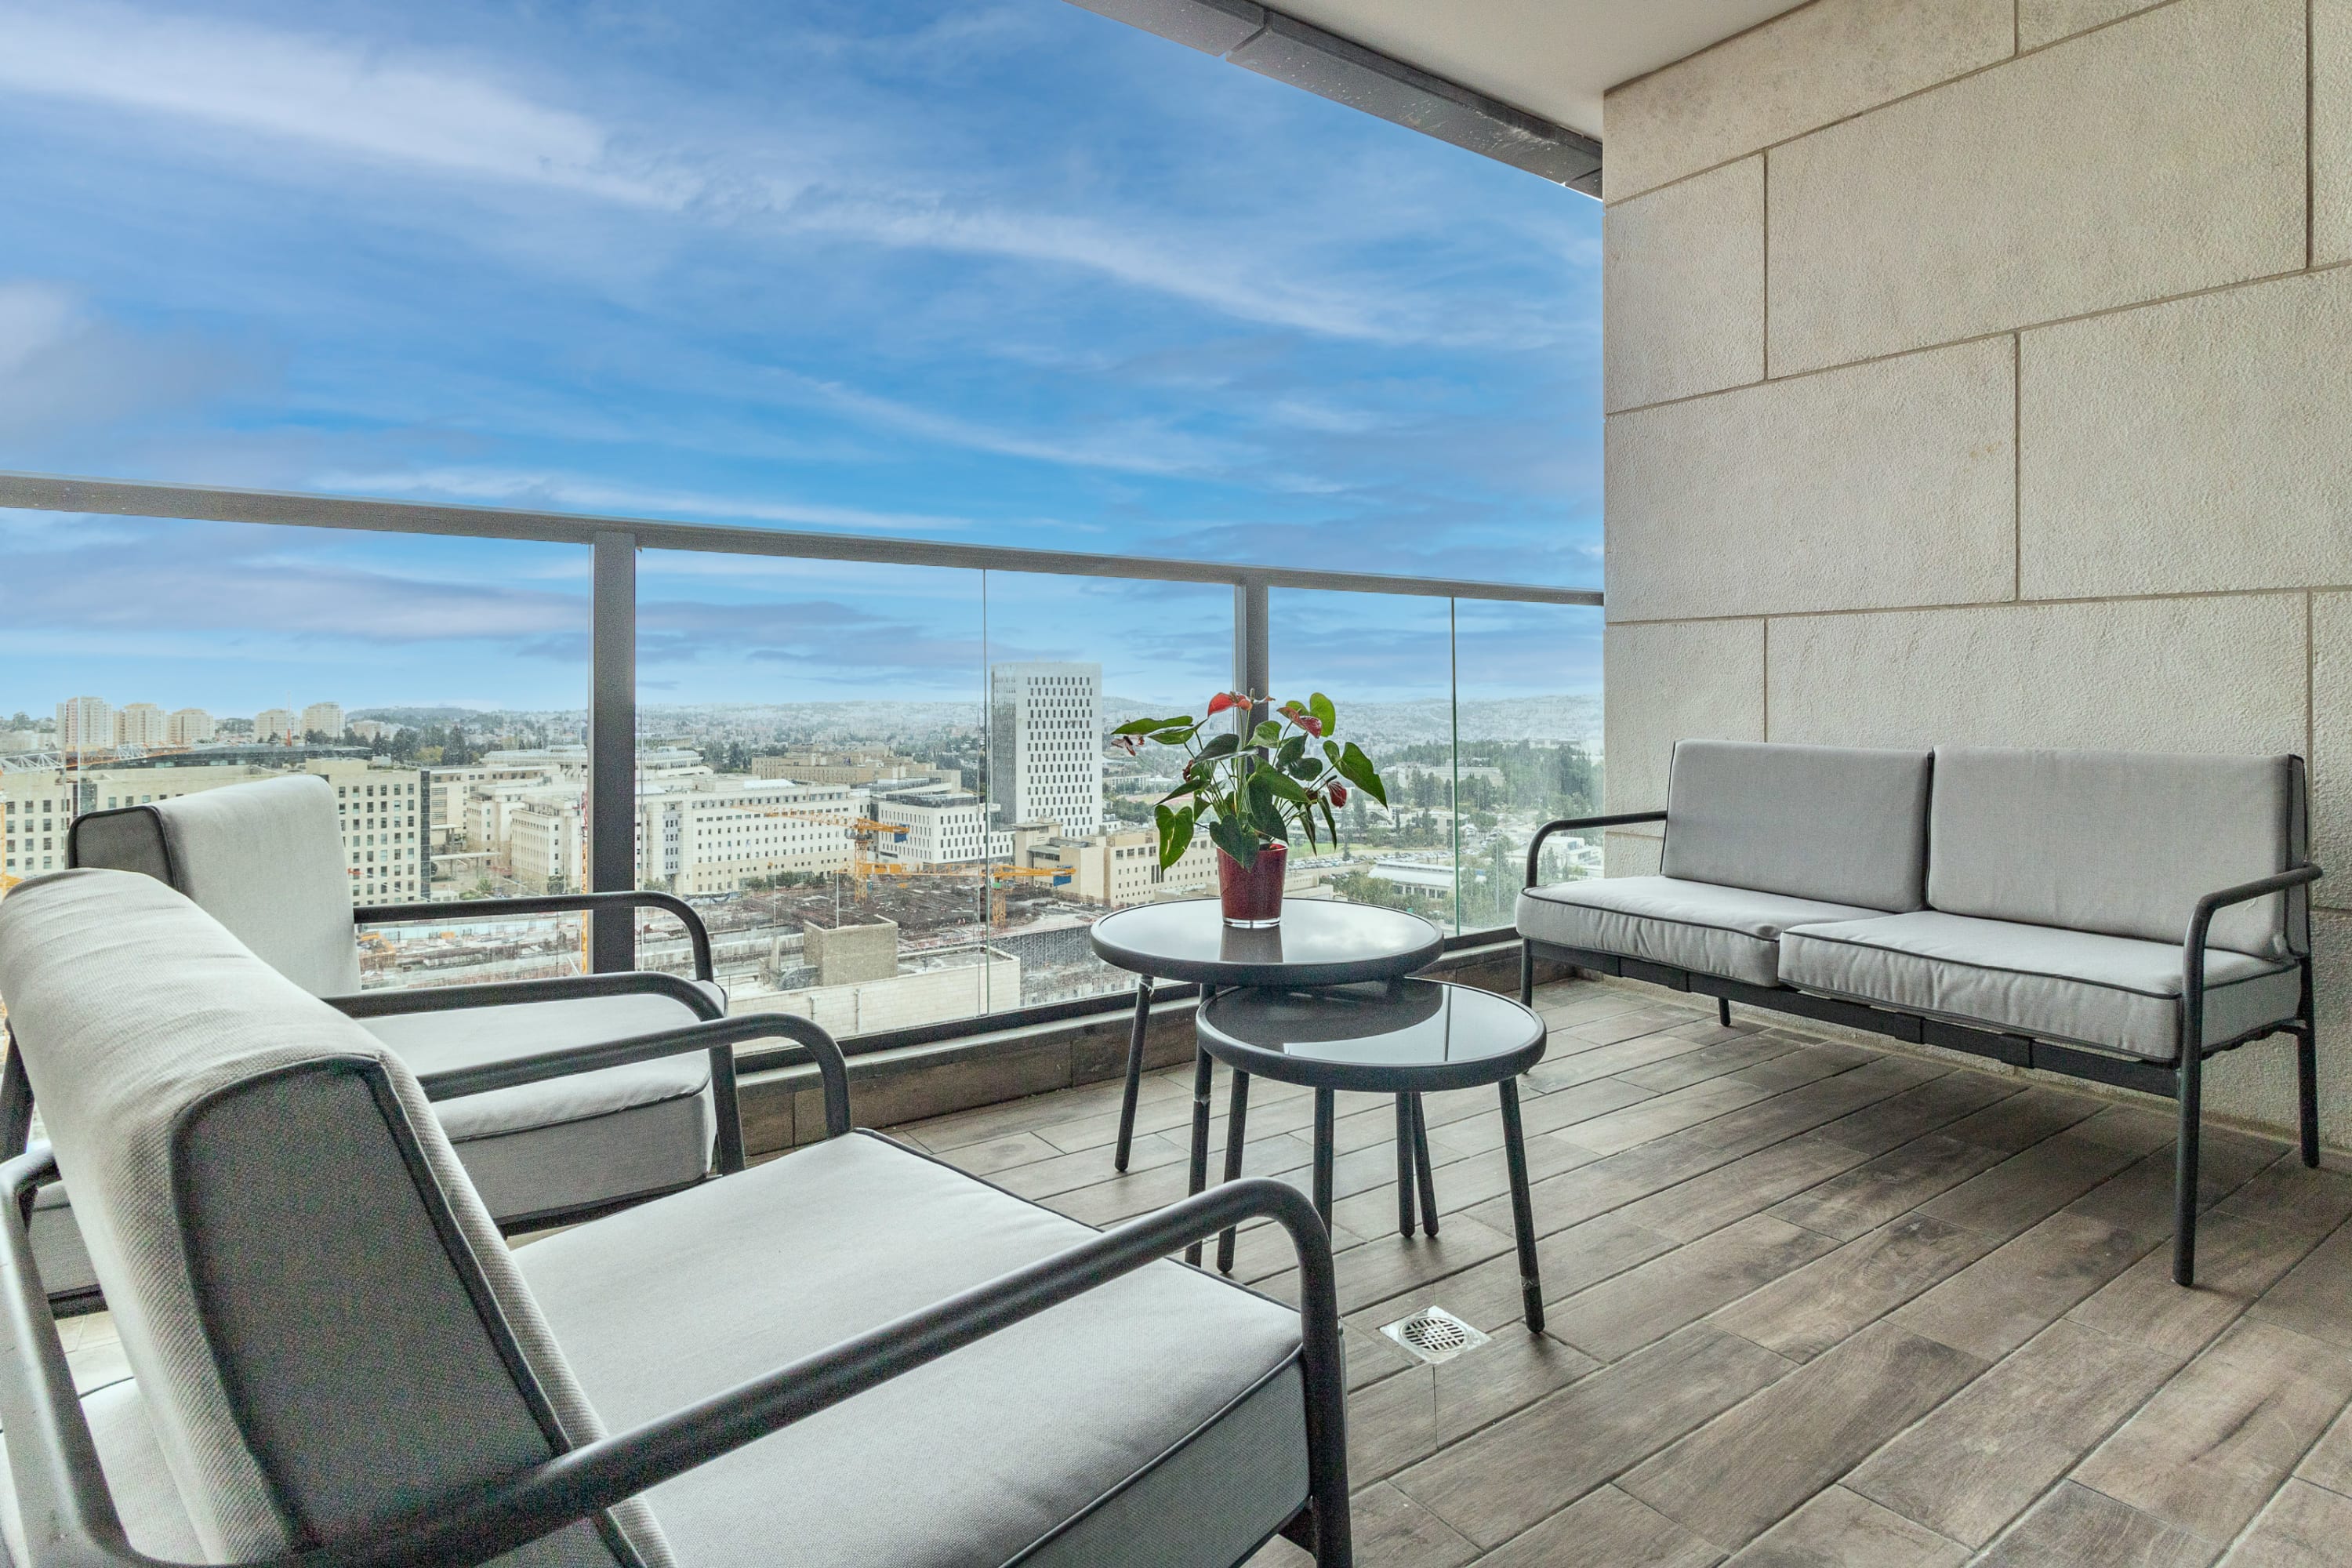 Property Image 2 - Magical 2BR/Parking with amazing view in city gate